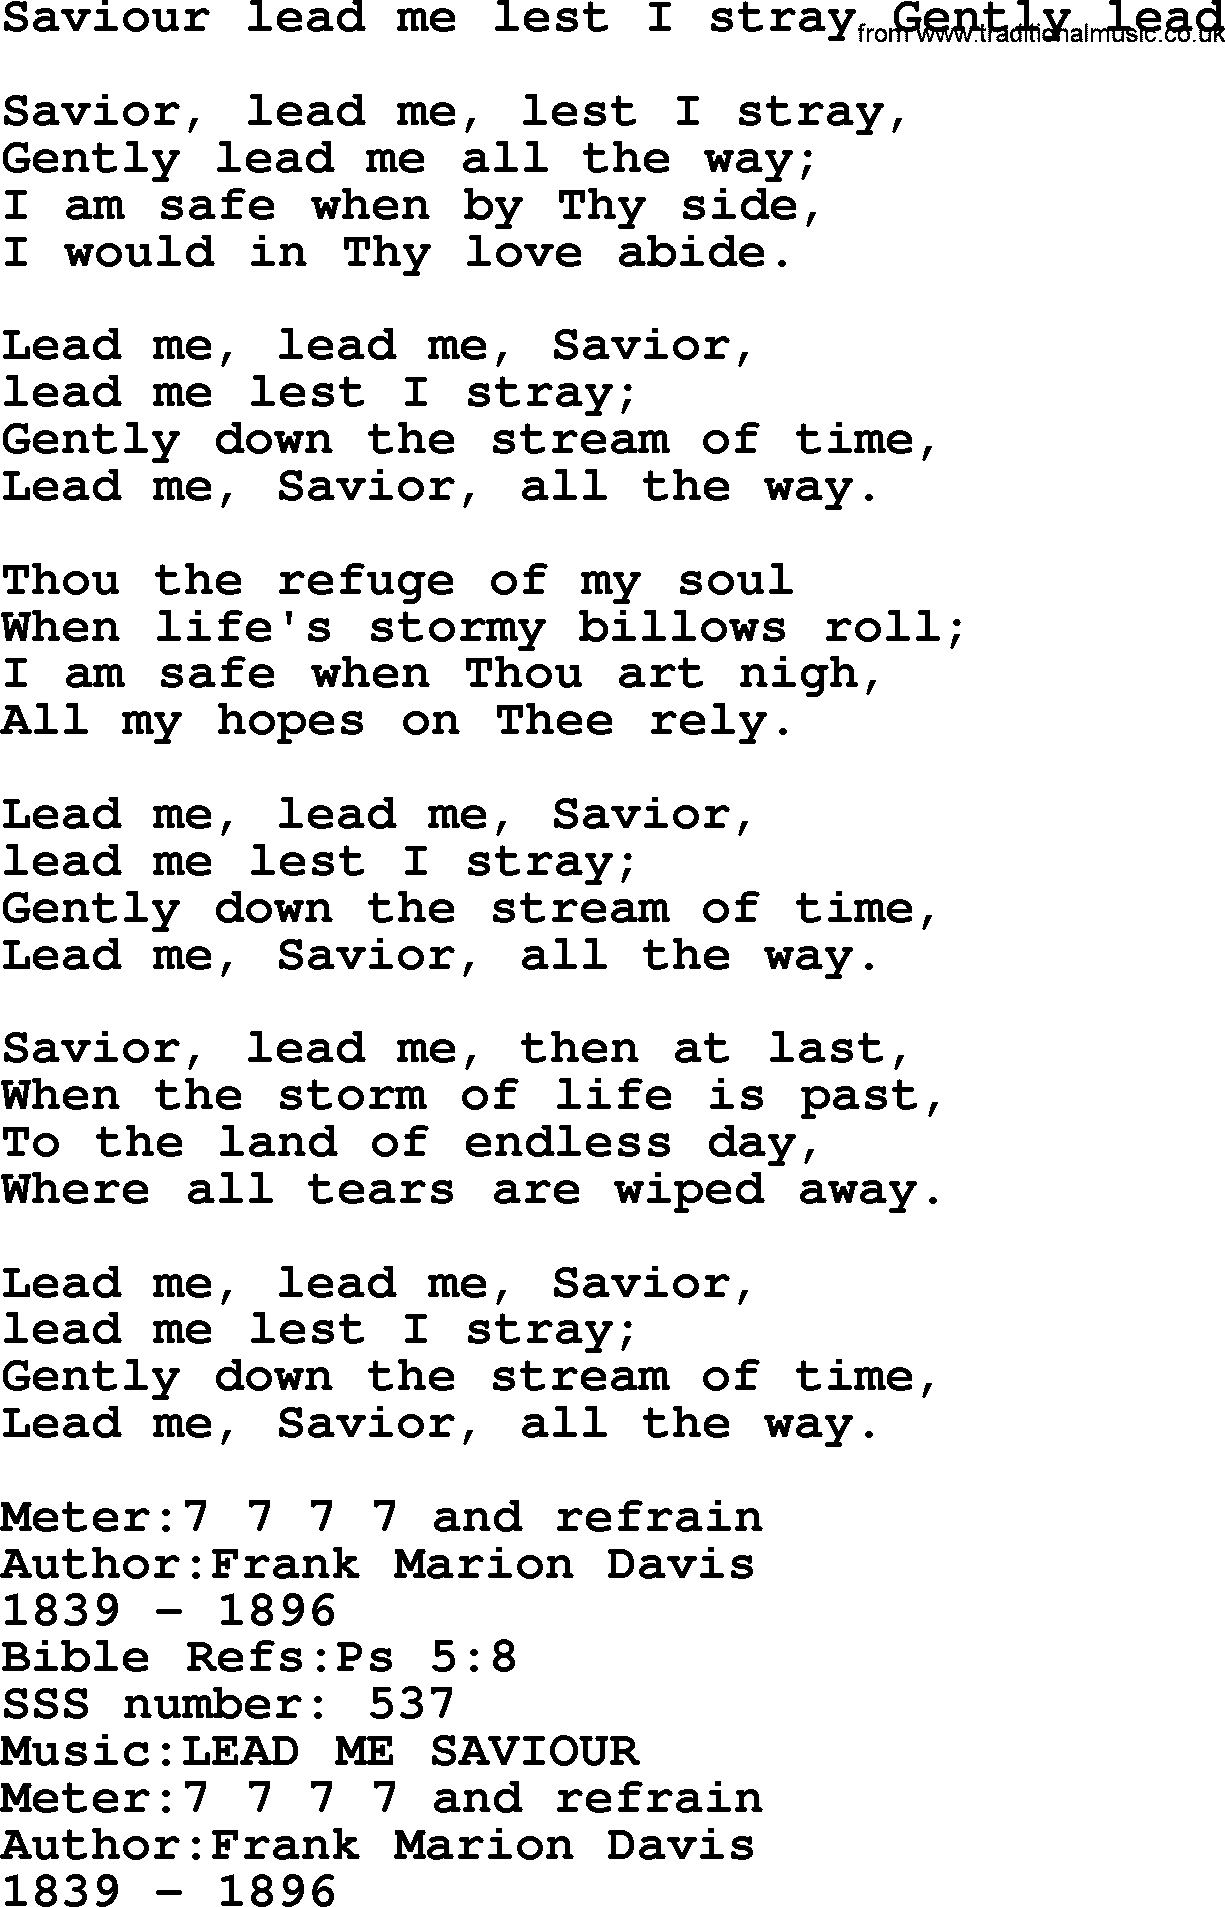 Sacred Songs and Solos complete, 1200 Hymns, title: Saviour Lead Me Lest I Stray Gently Lead, lyrics and PDF